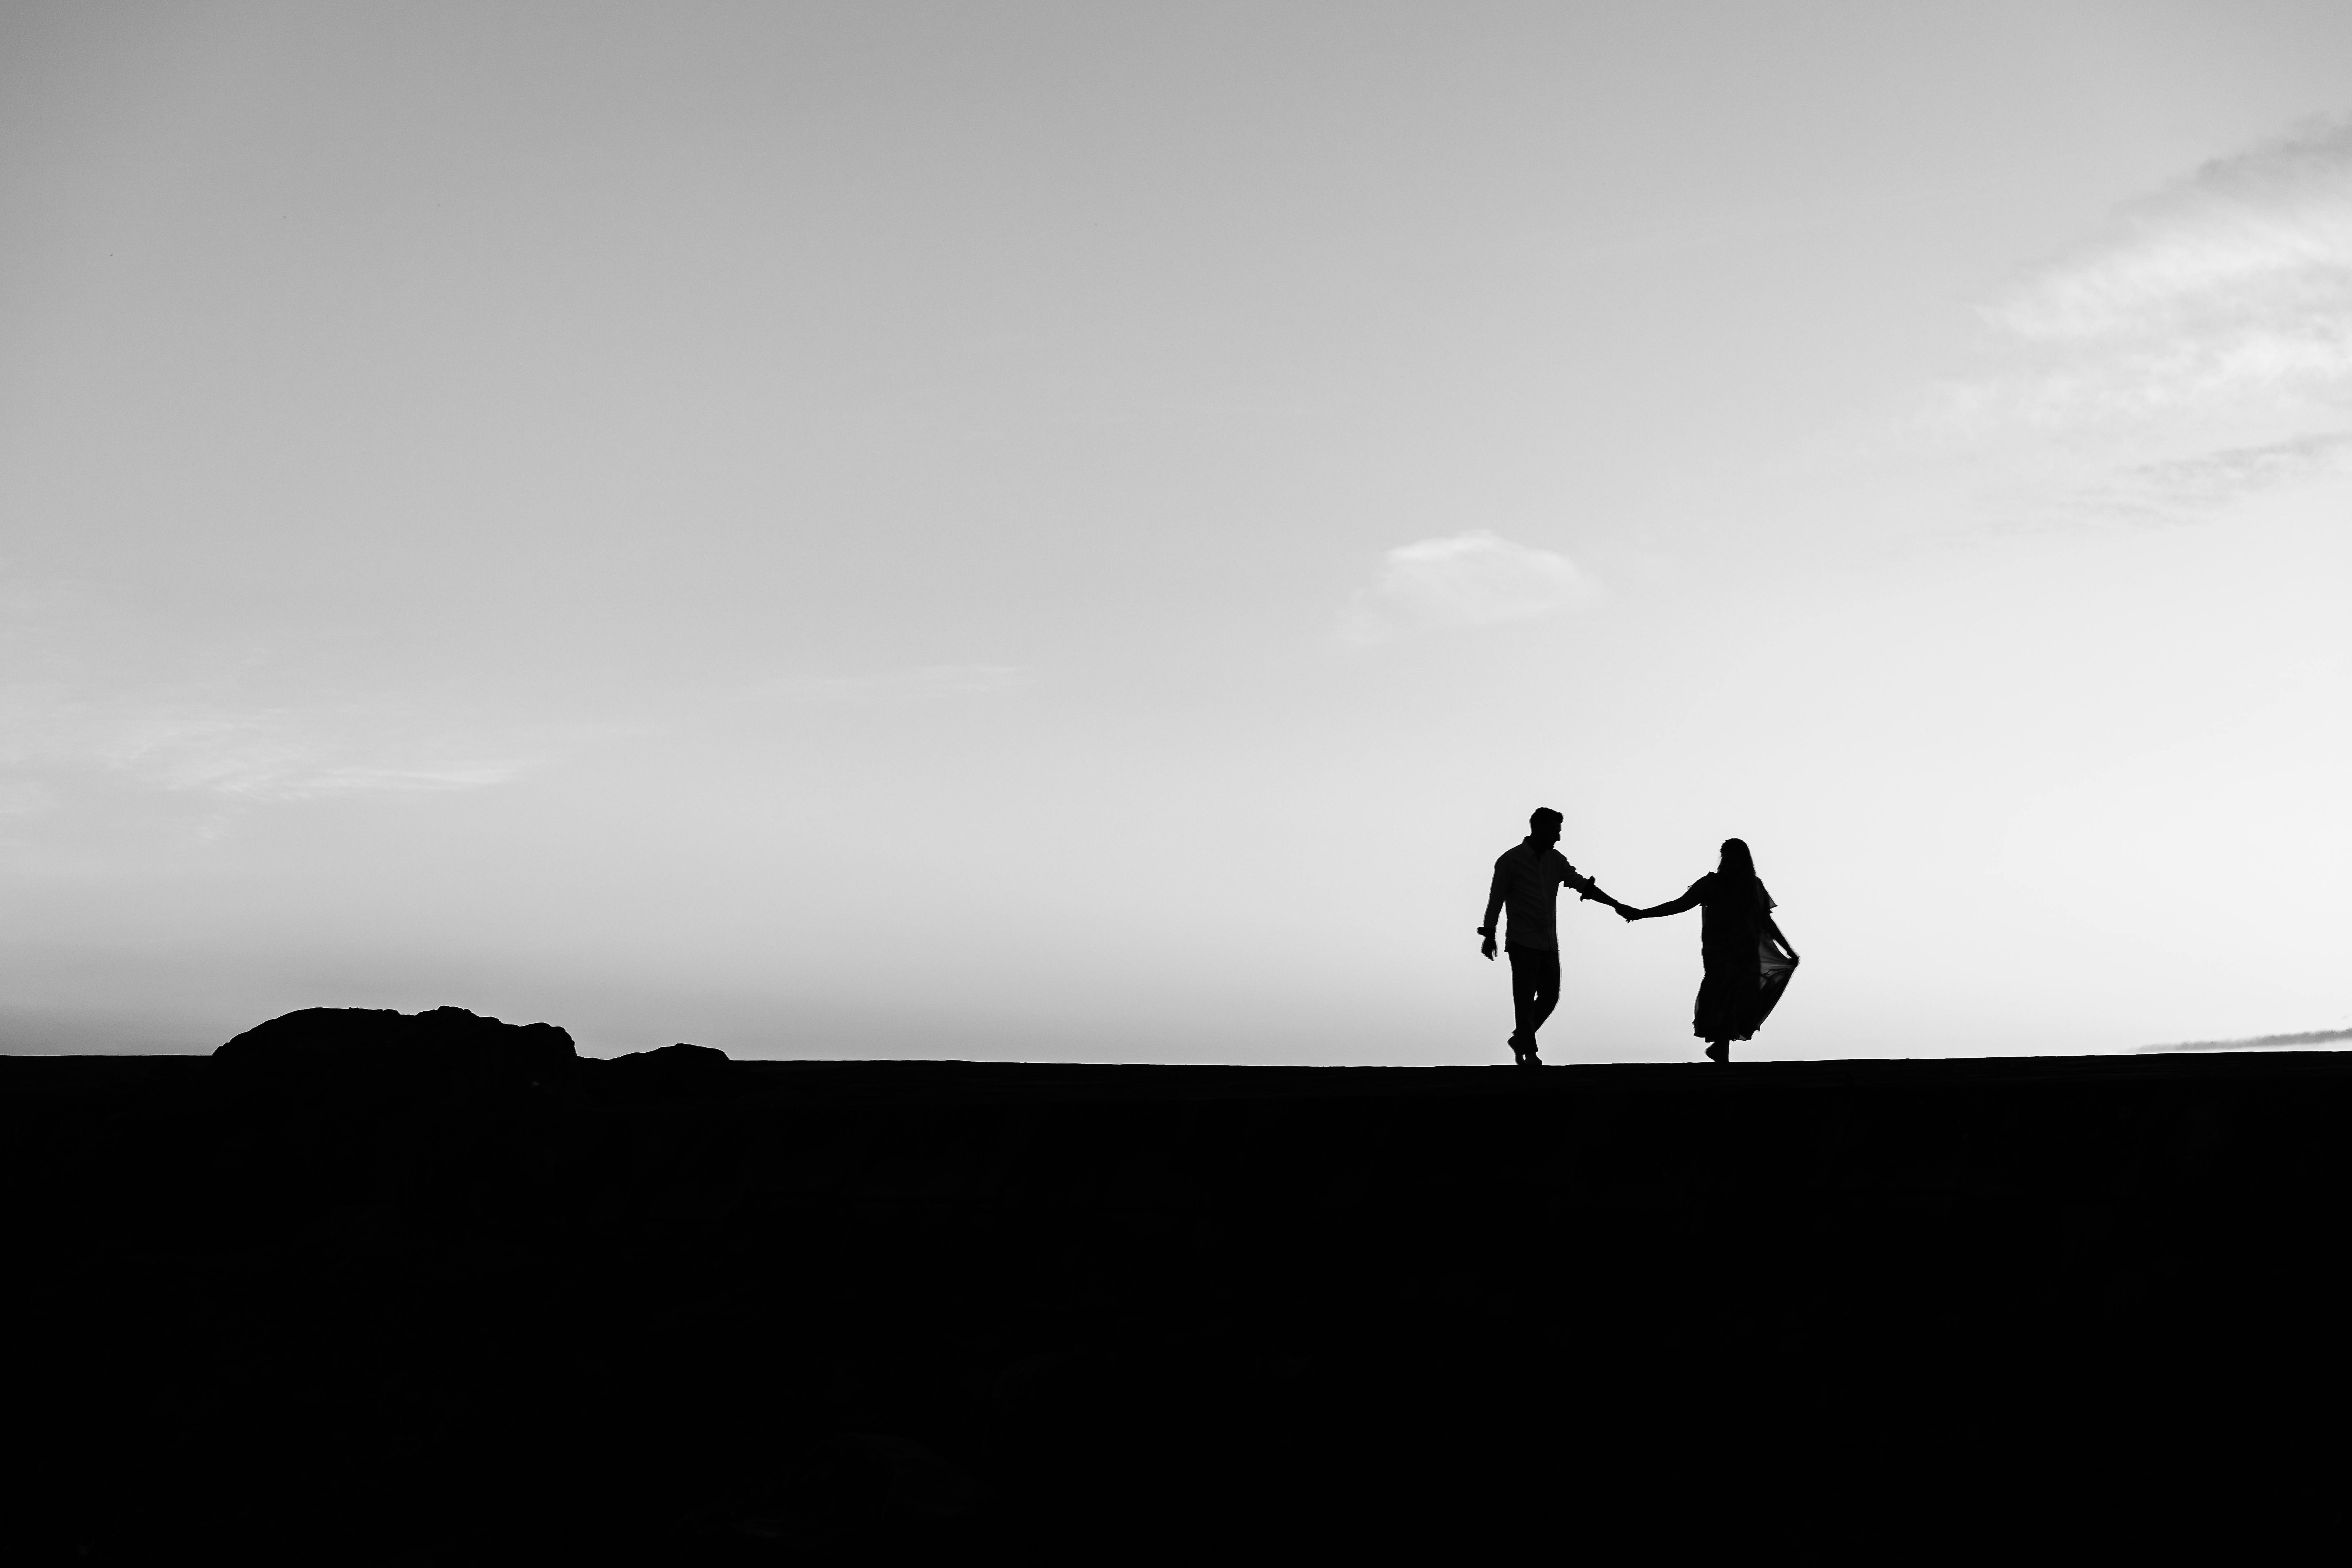 couple black silhouette holding hands